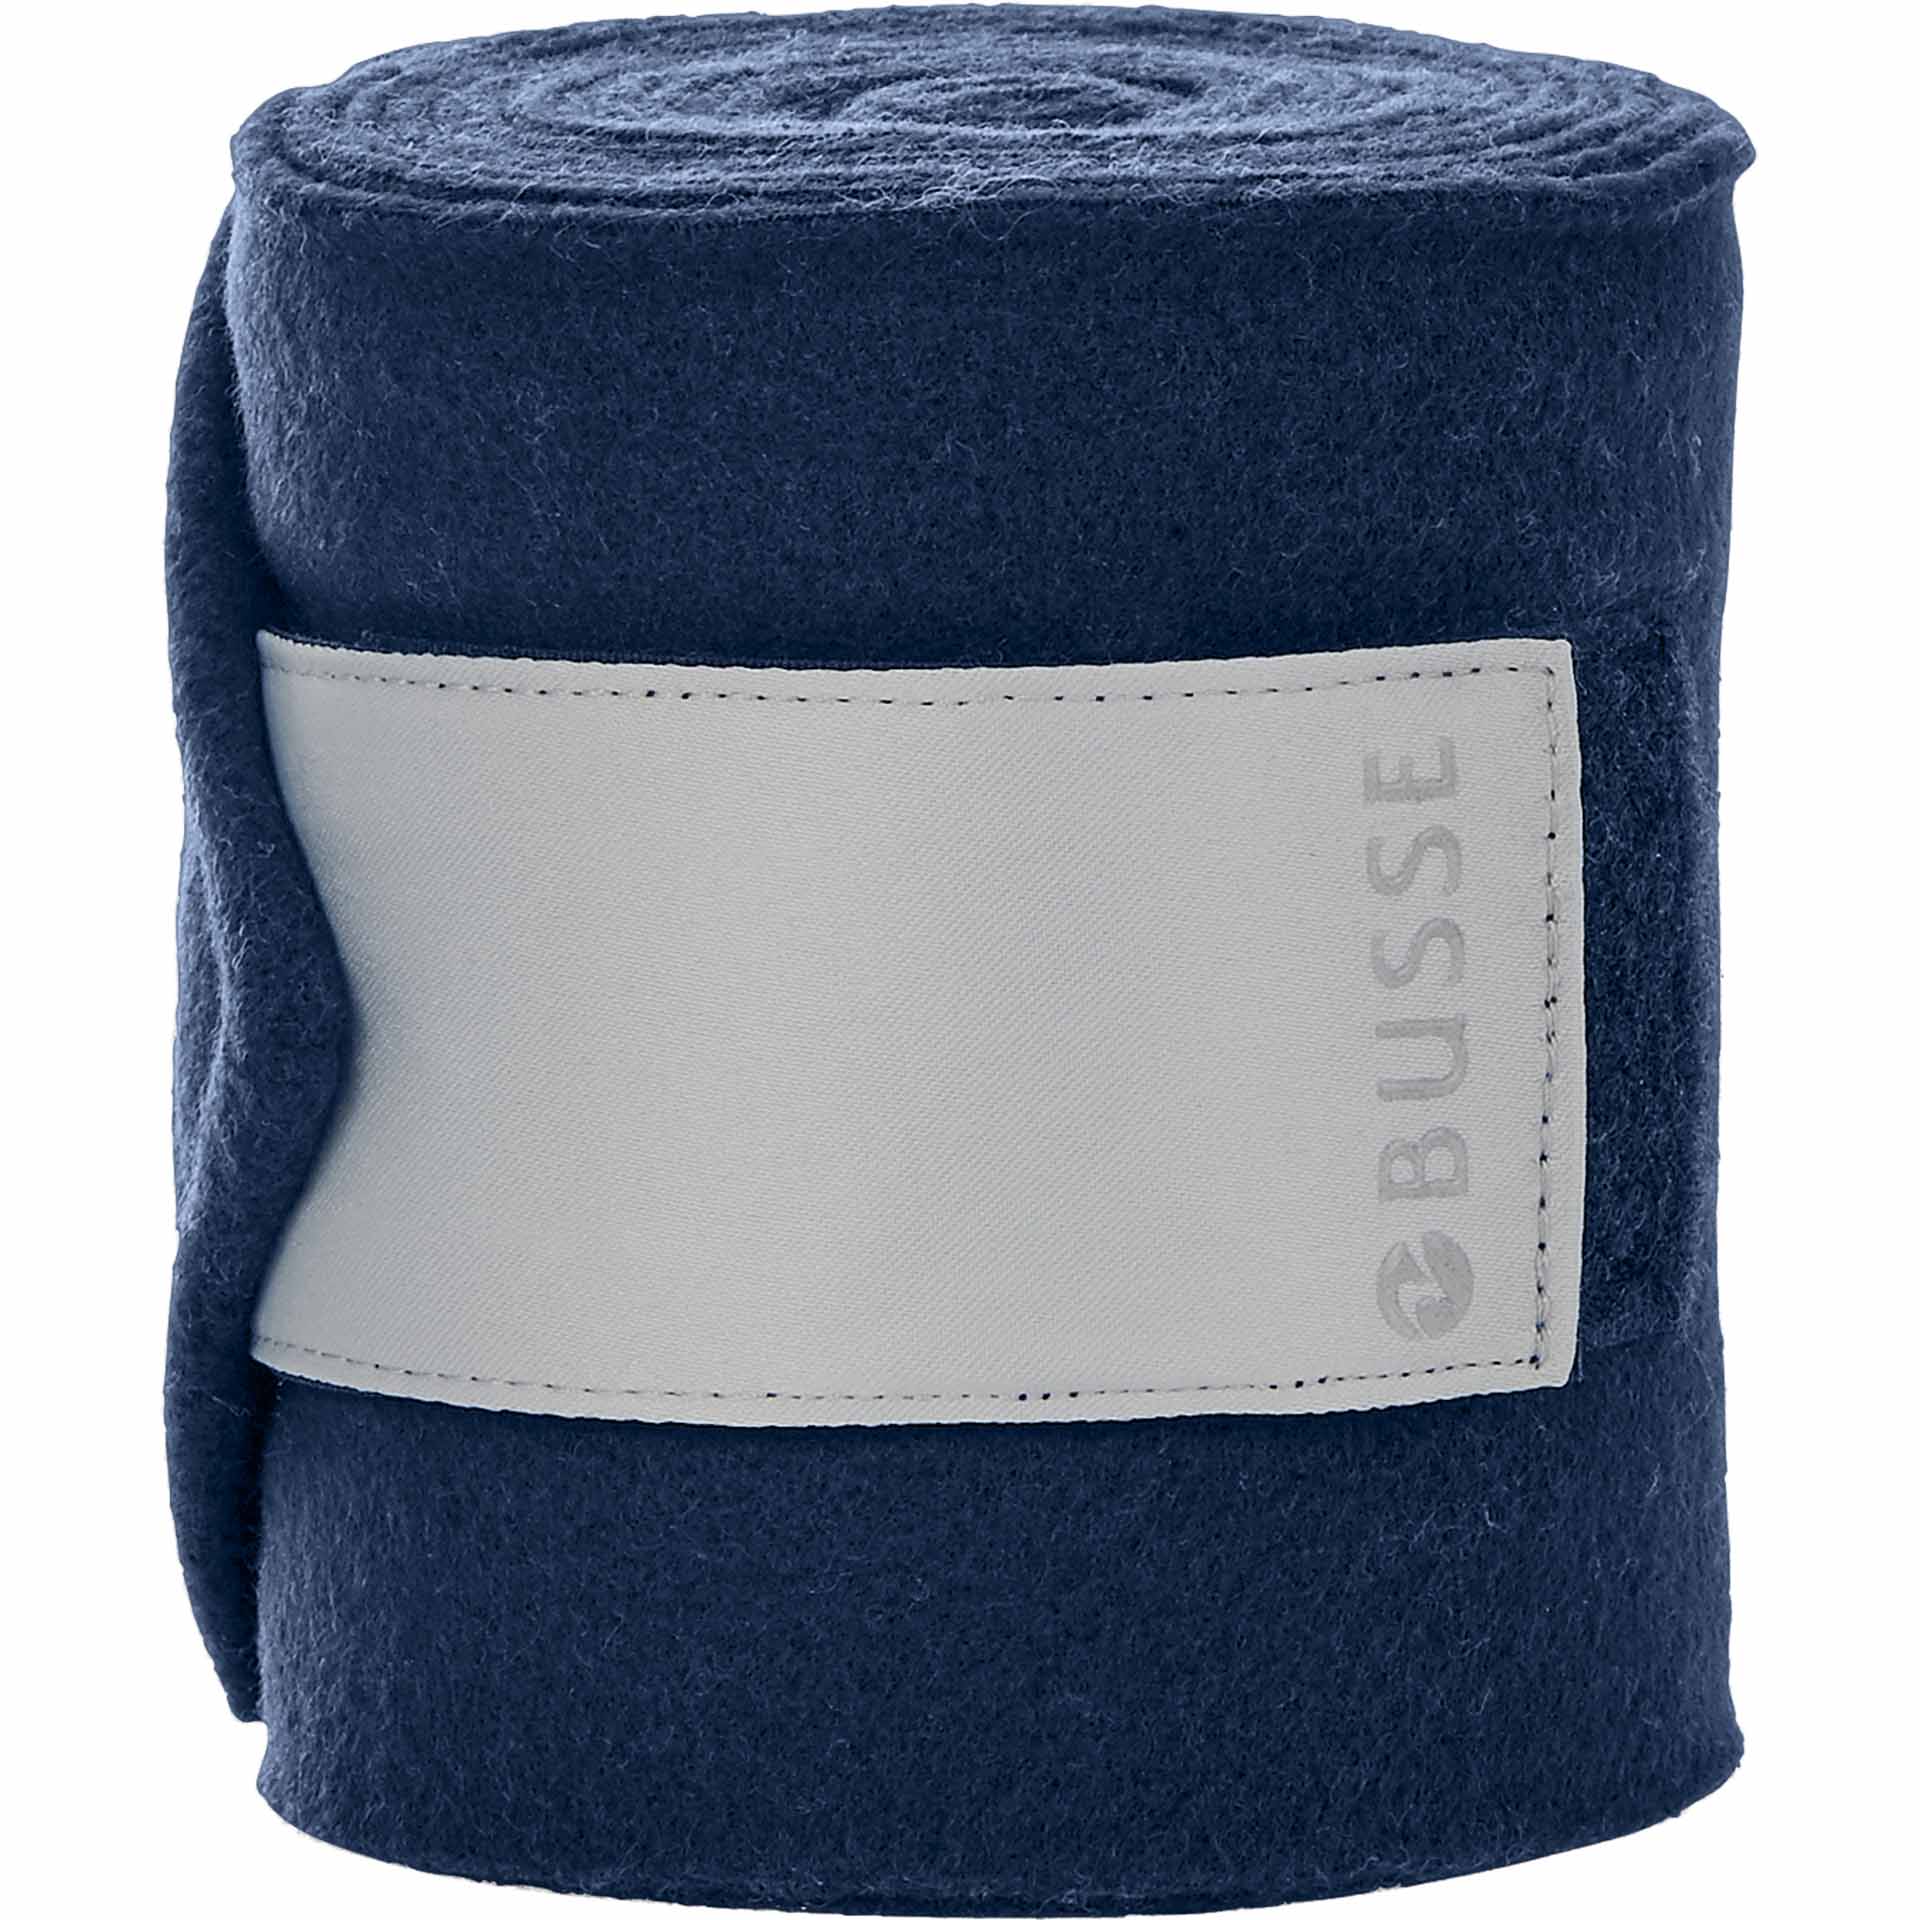 BUSSE Bandages CLASSIC SATIN 250x10 navy/gray